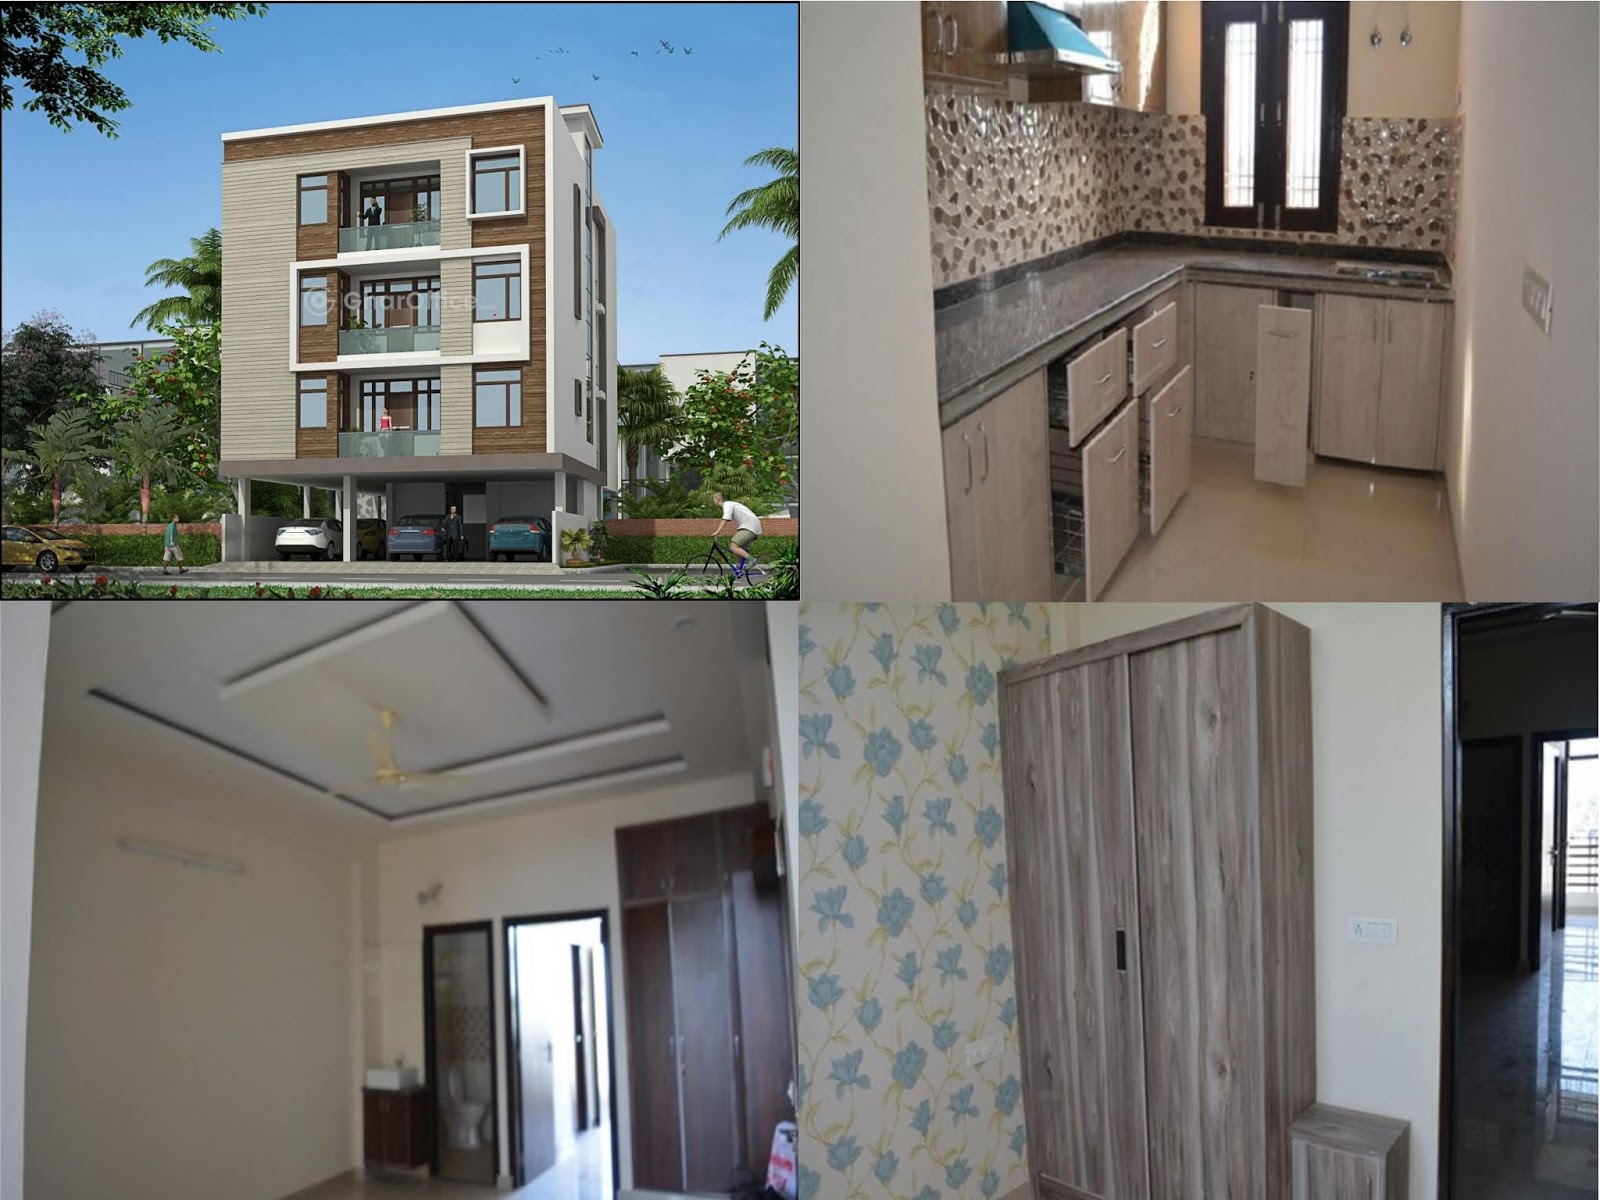 How To Select Budget Flats in Mansarovar, Jaipur?